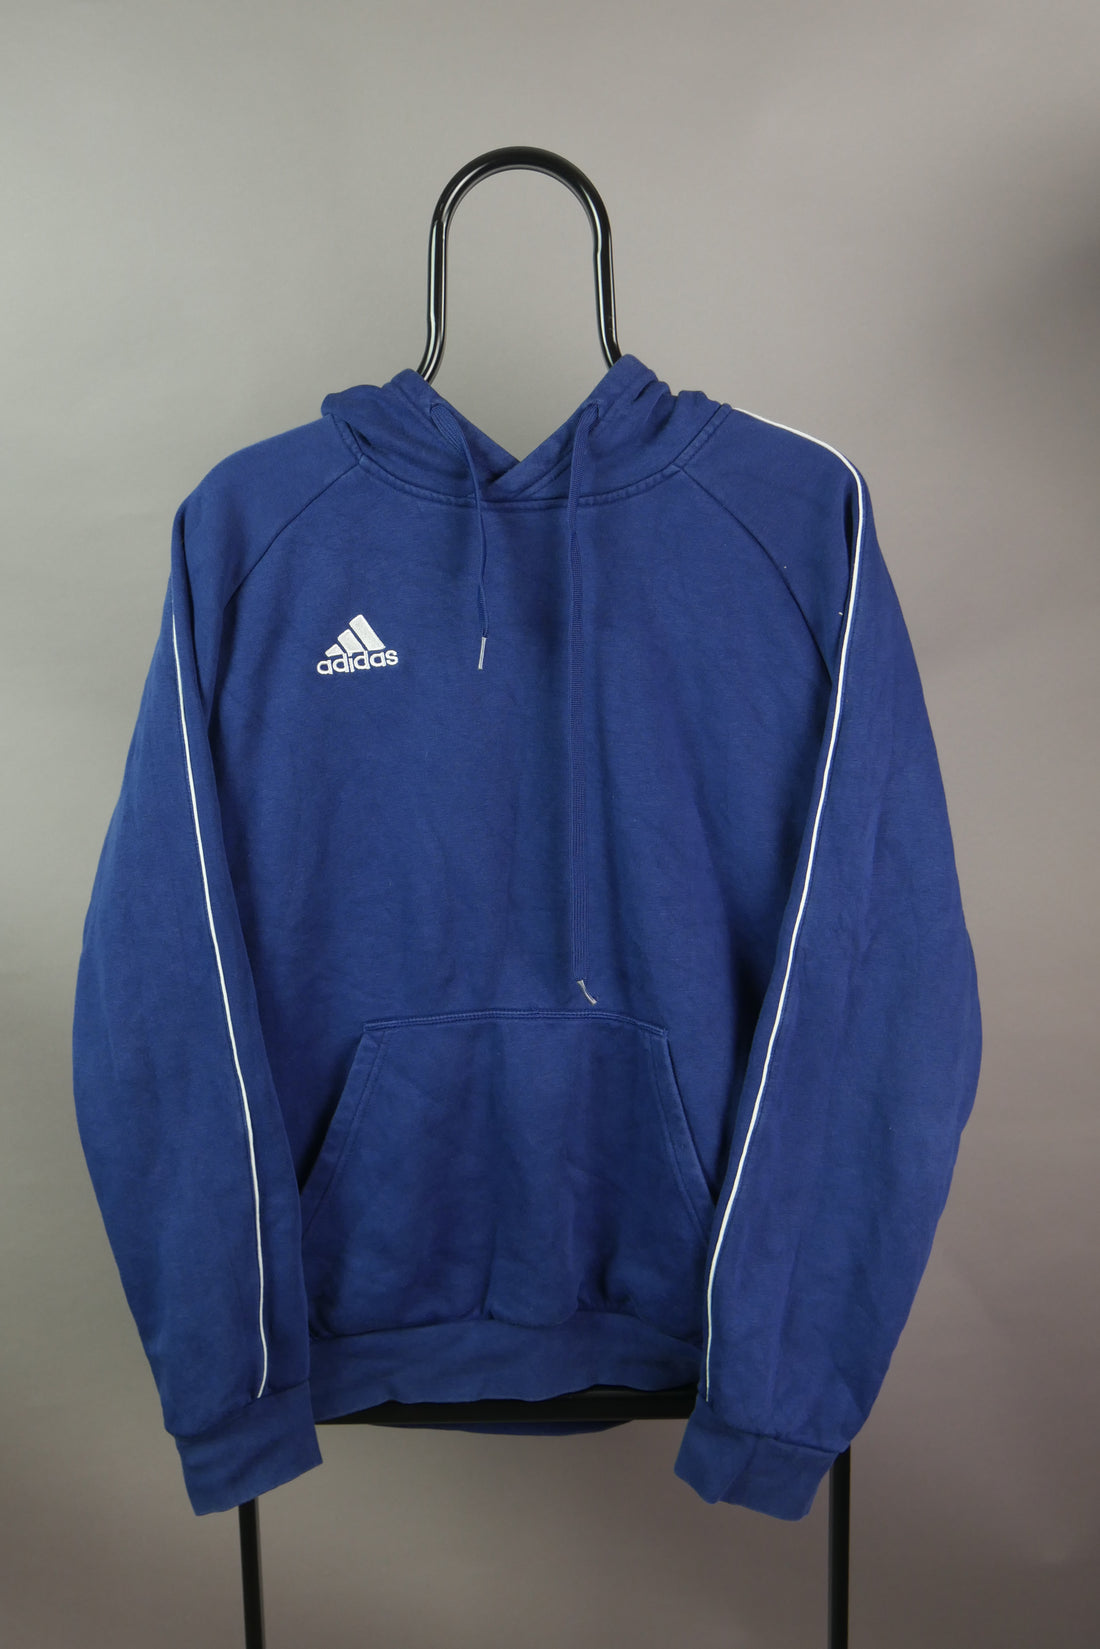 The Adidas Embroidered Logo Hoodie (L)